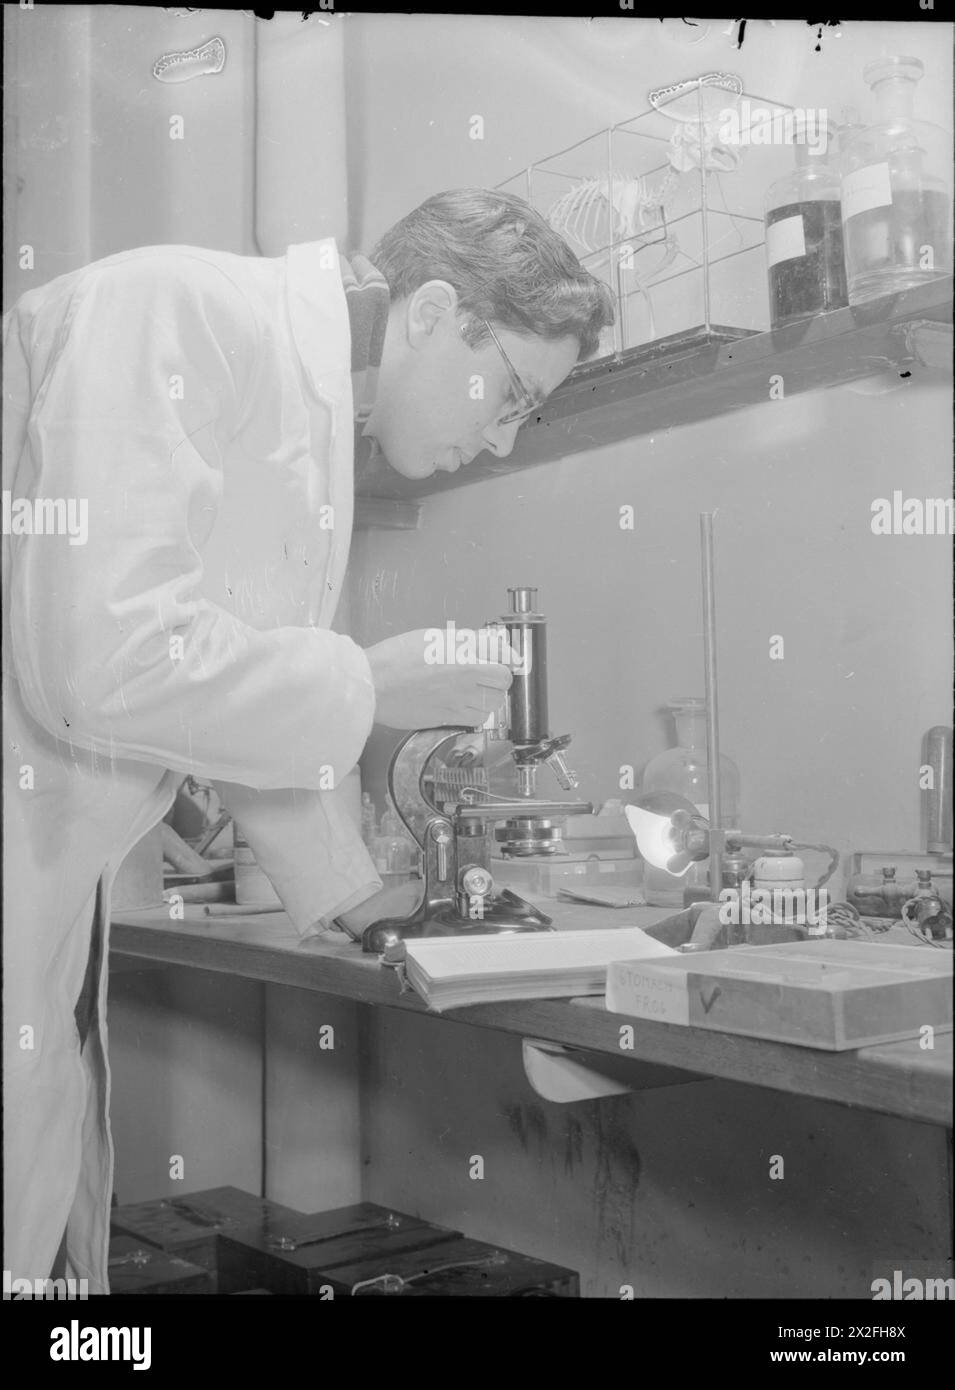 COLONIAL STUDENTS IN GREAT BRITAIN: STUDENT AT GUY'S MEDICAL SCHOOL, LONDON, ENGLAND, UK, 1946 - Mr Abdool Raman examines the stomach of a frog under a microscope at Guy's Medical School. On a shelf above him can be seen the skeleton of a hare Stock Photo